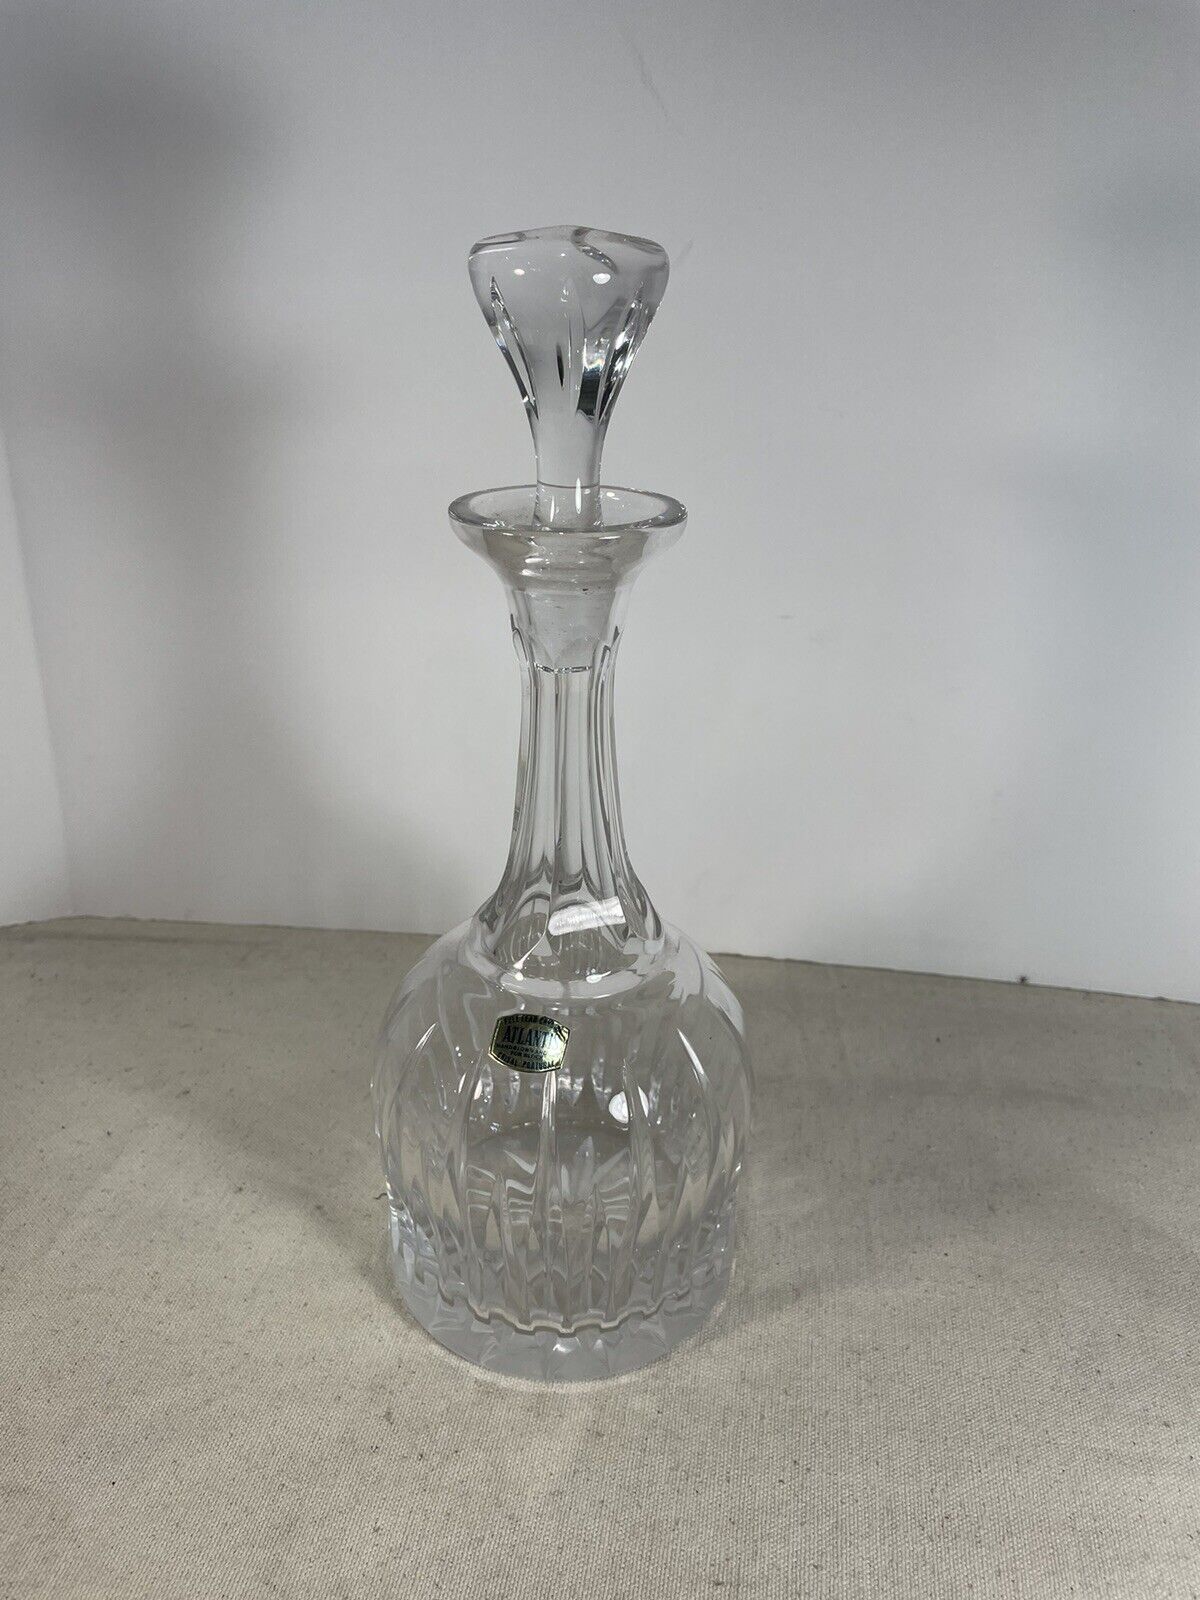 Vintage Atlantis Full Lead Crystal Decanter. Hand Blown &Cut. Made In Portugal.